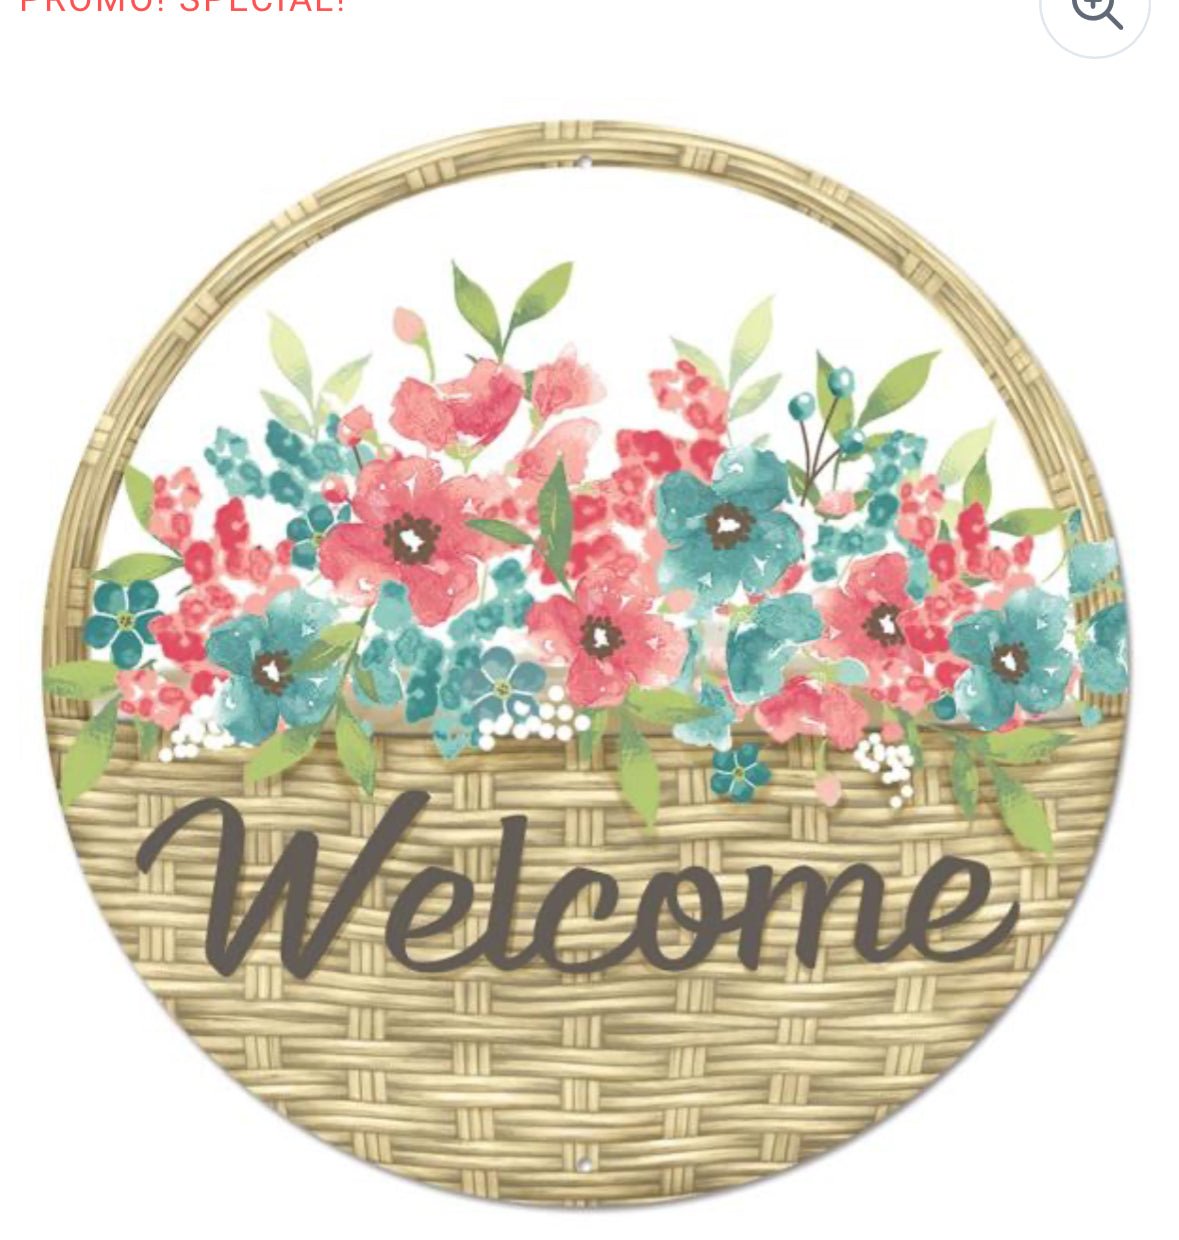 Welcome, floral, round metal sign 12” - Greenery MarketHome & GardenMd1332